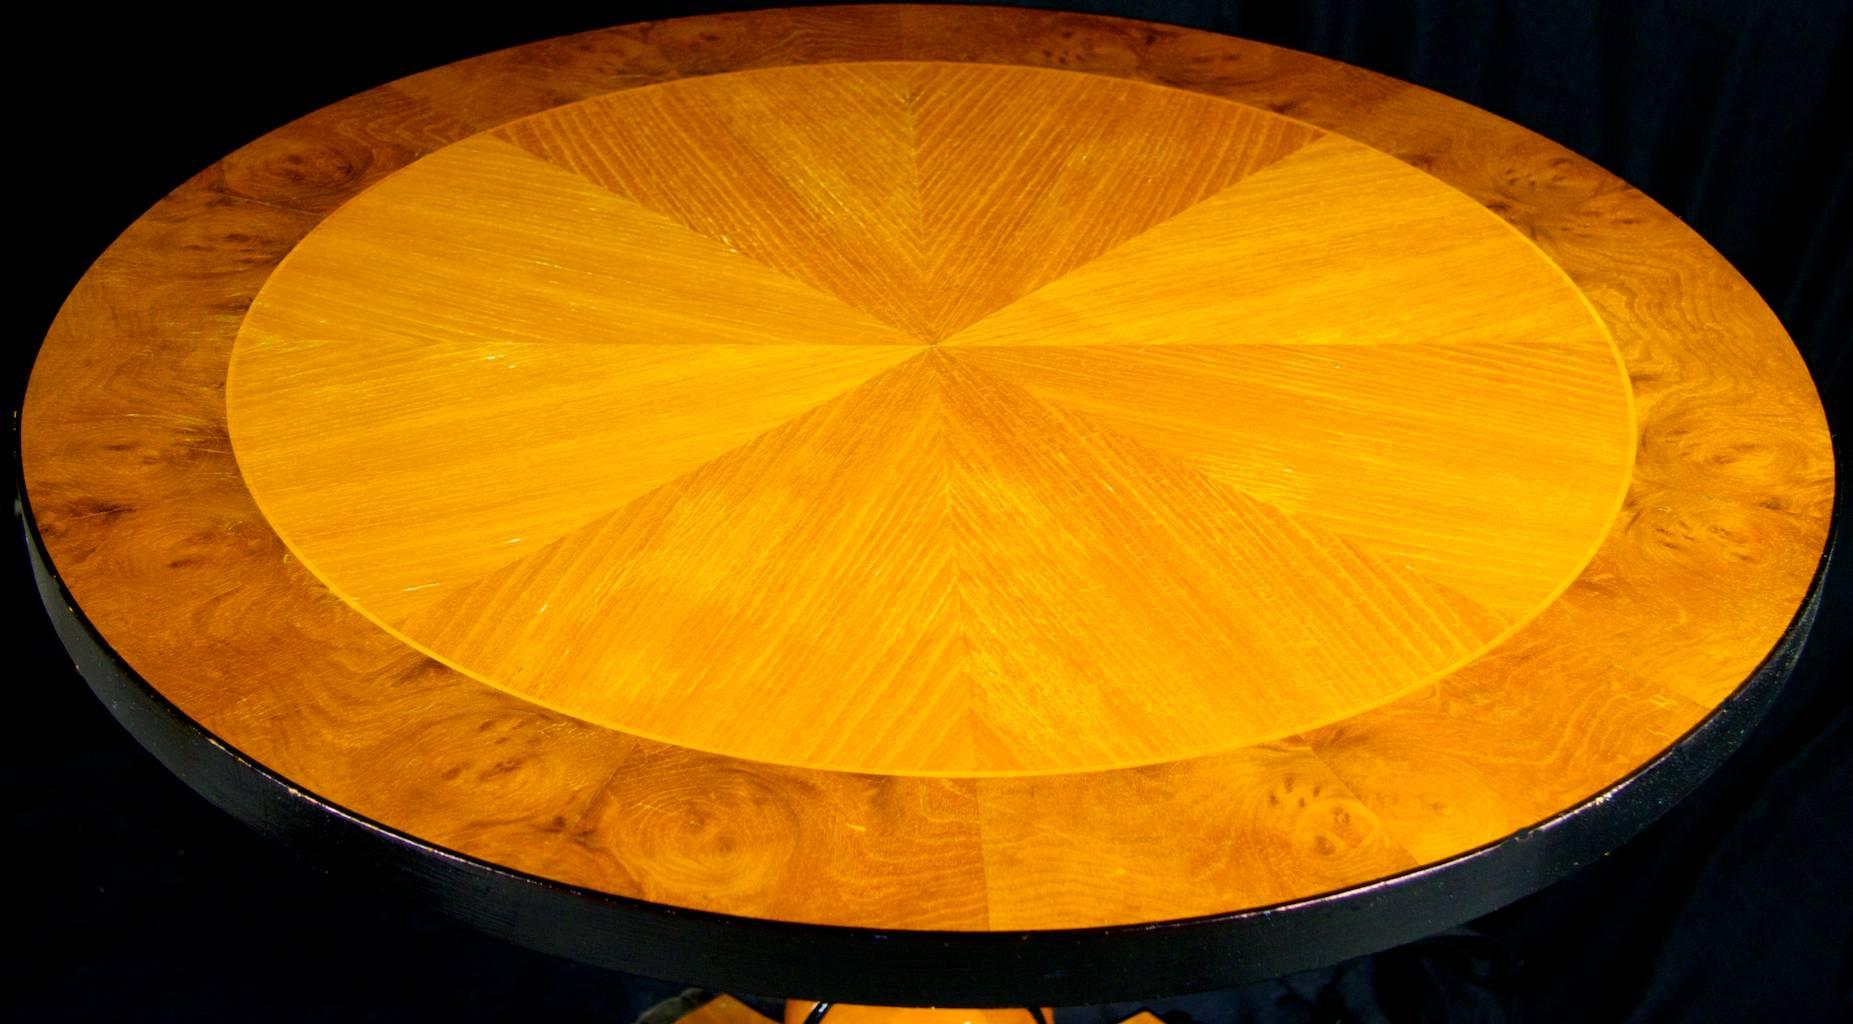 Stunning Swedish Biedermeier table with top grade golden birch flame veneers in an inlaid 8th veneer pattern with ormolu detail on the edge, pedestal, feet and base finished in the desirable honey color golden birch French polish finish.

Very